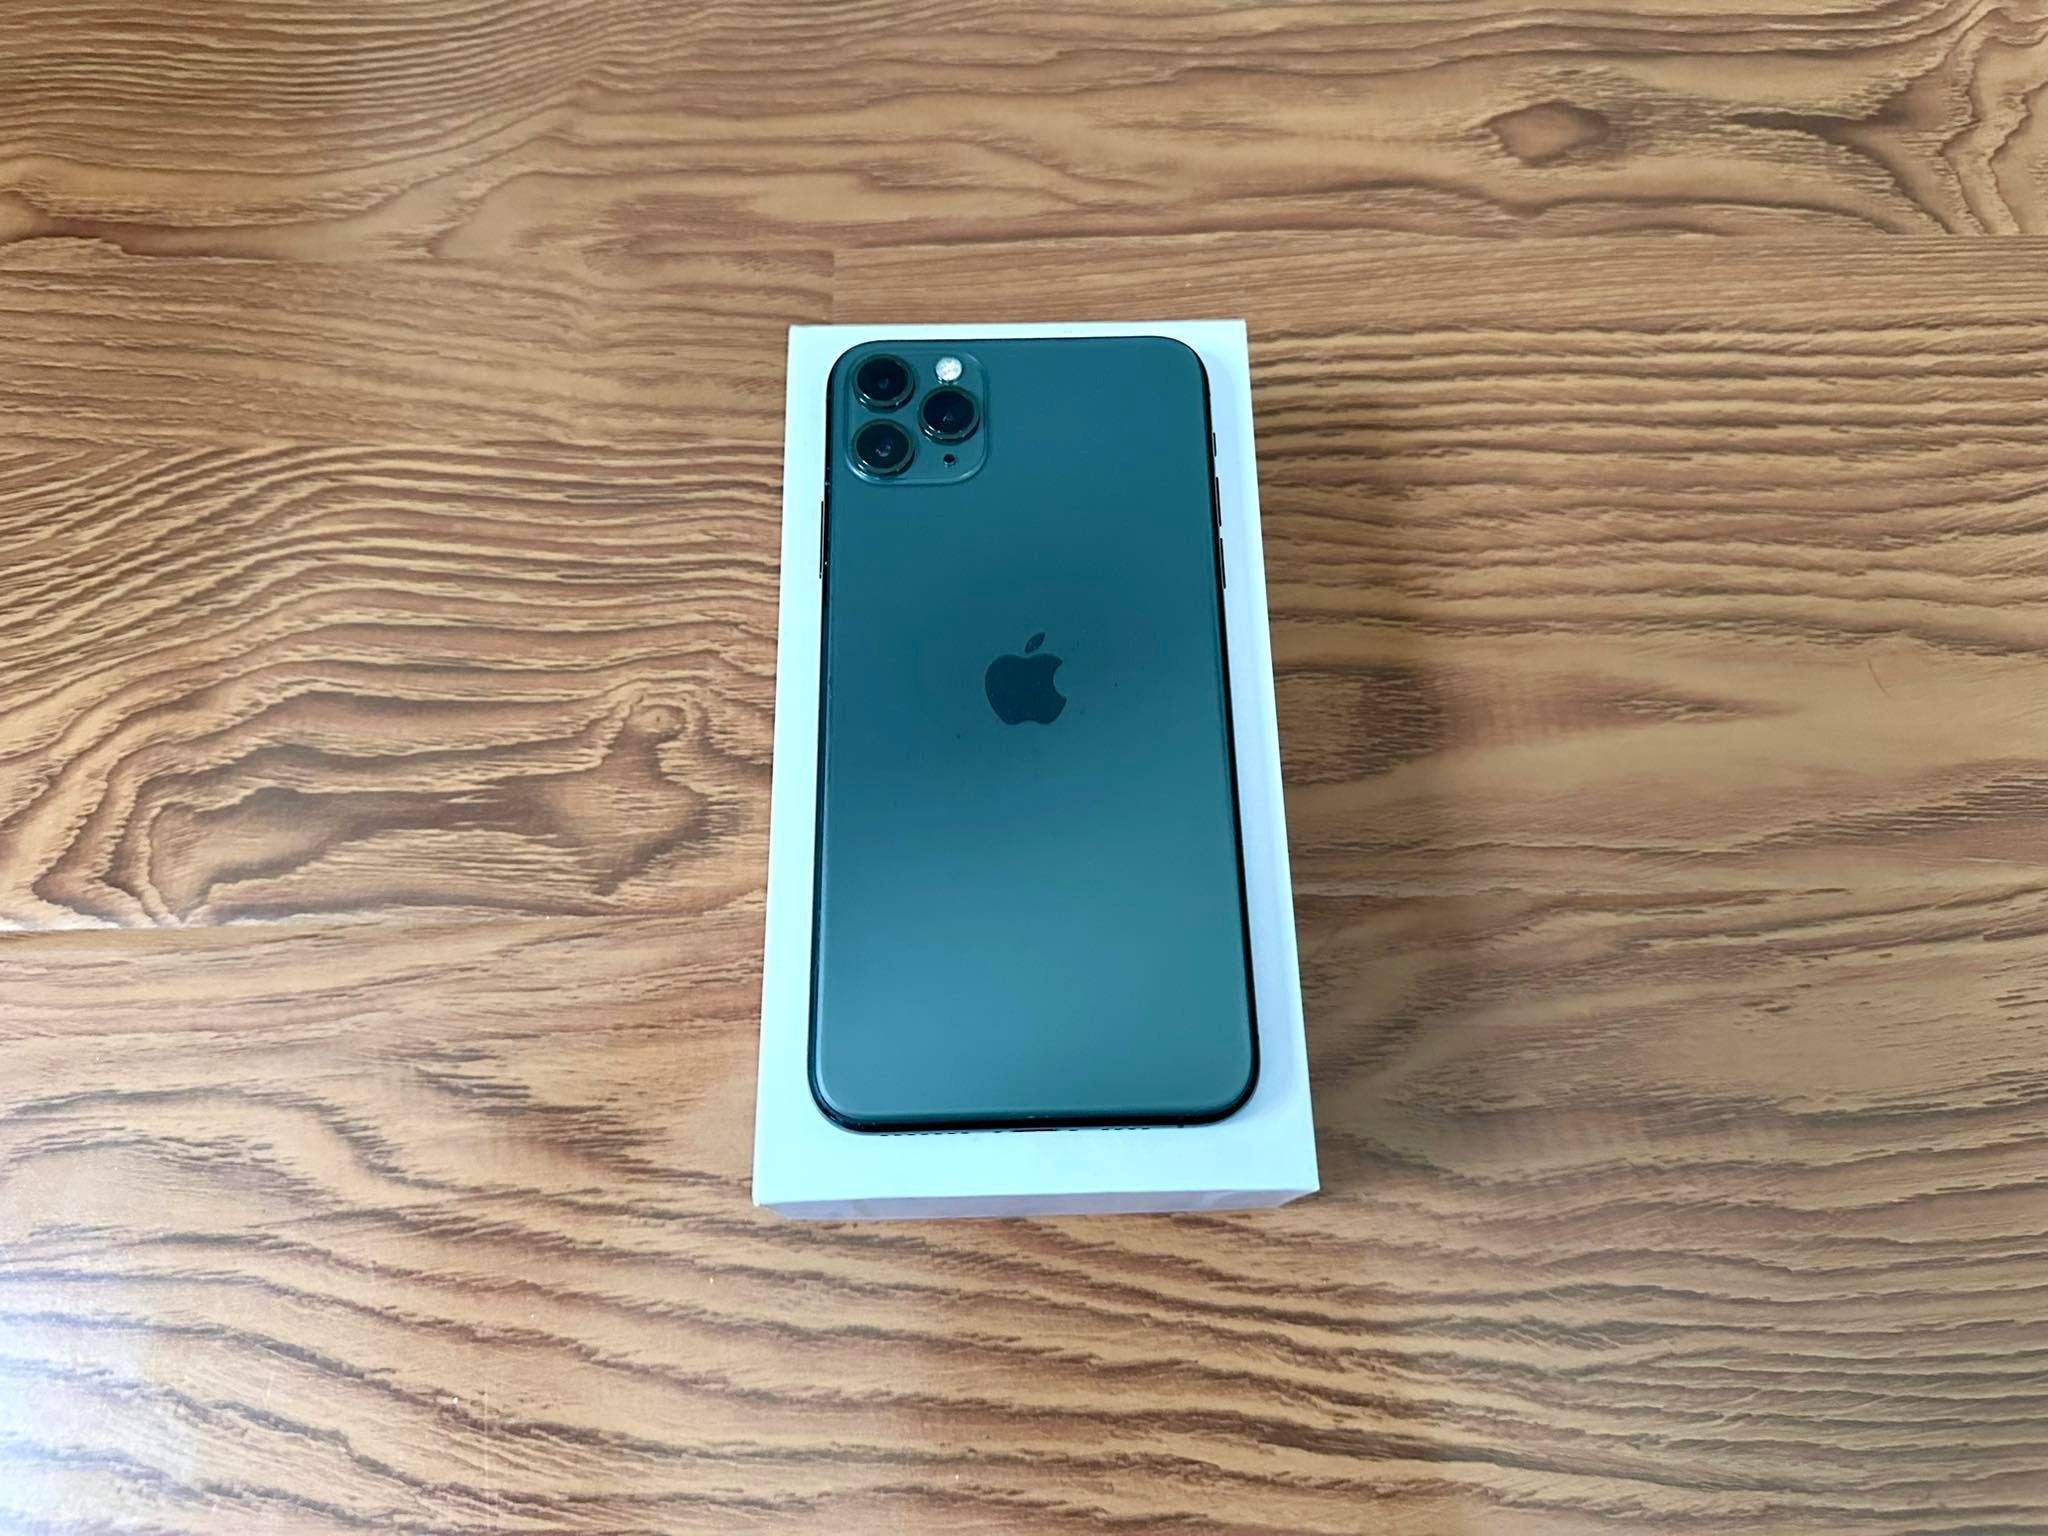 Apple iPhone 11 Pro Max 64GB Midnight Green - New Battery, Case, Screen Protector & Shipping (As New)